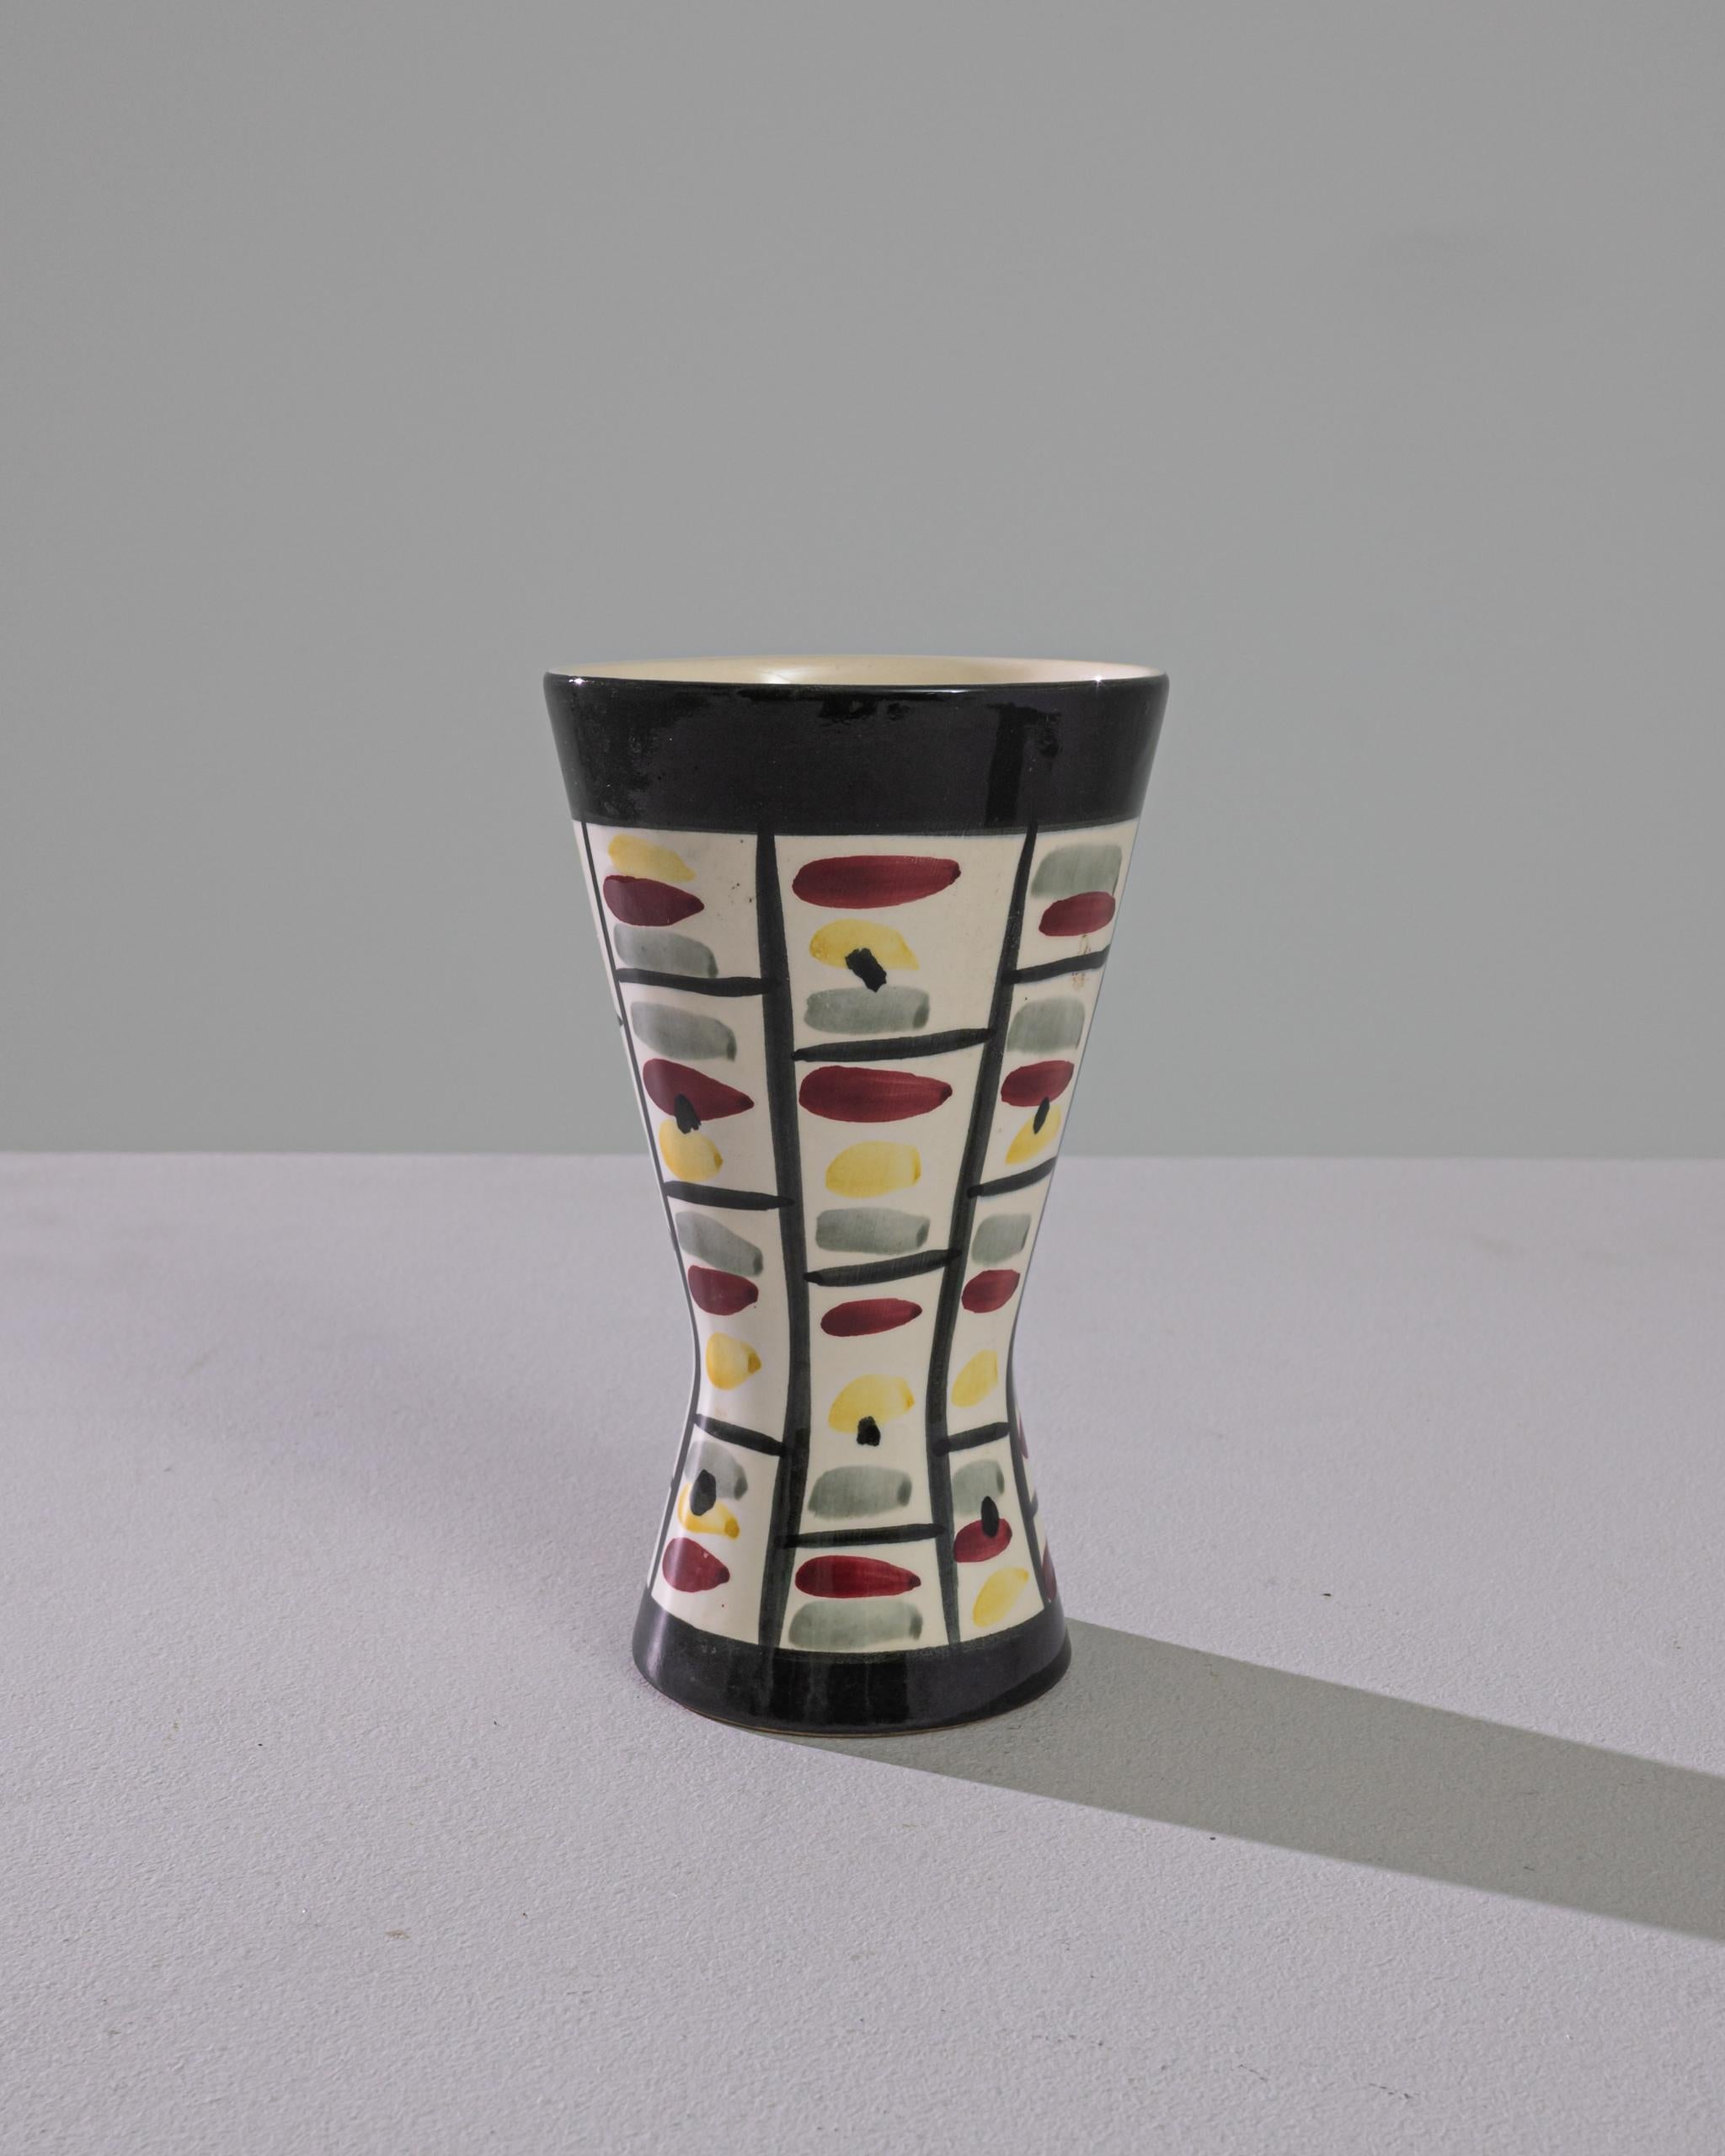 This striking 1960s German Ceramic Vase by Strehla Keramik is a vibrant artifact of mid-century modern design. Its unique tapering form is a testament to the era's love for geometric silhouettes and functional art. Adorned with a playful array of